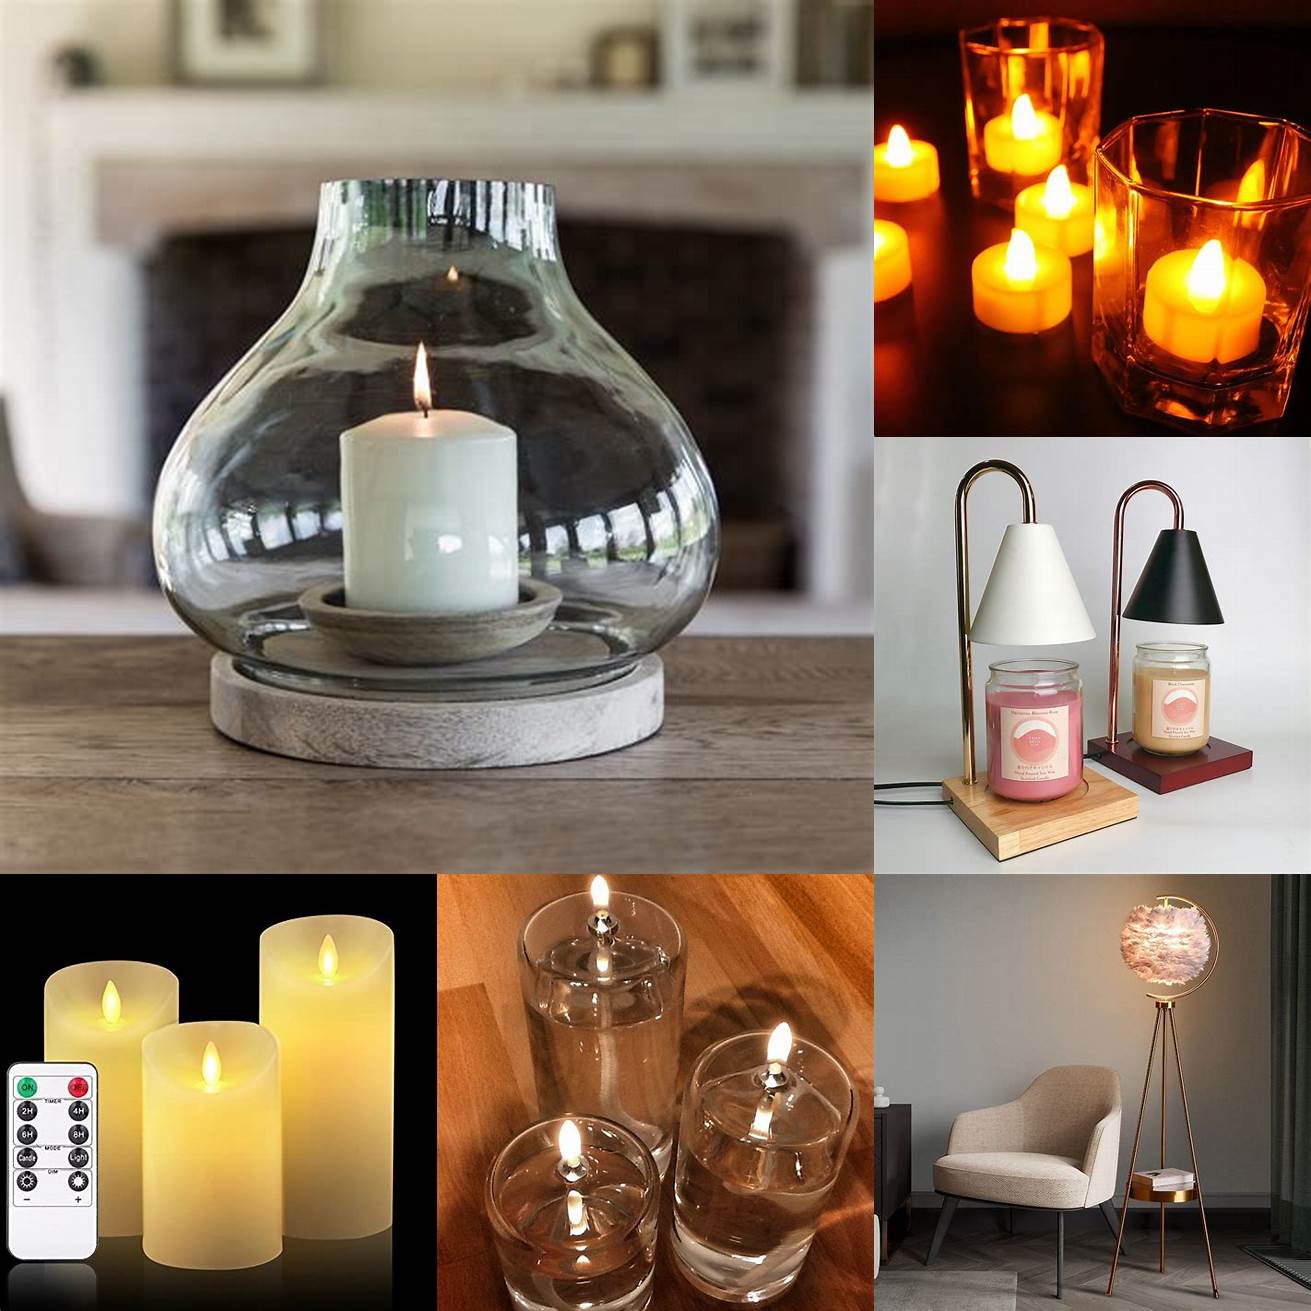 Lamps and candles Lamps and candles can add warmth and ambiance to your high back sofa You can choose a lamp or candle holder with a similar color or style as your sofa to create a unified look